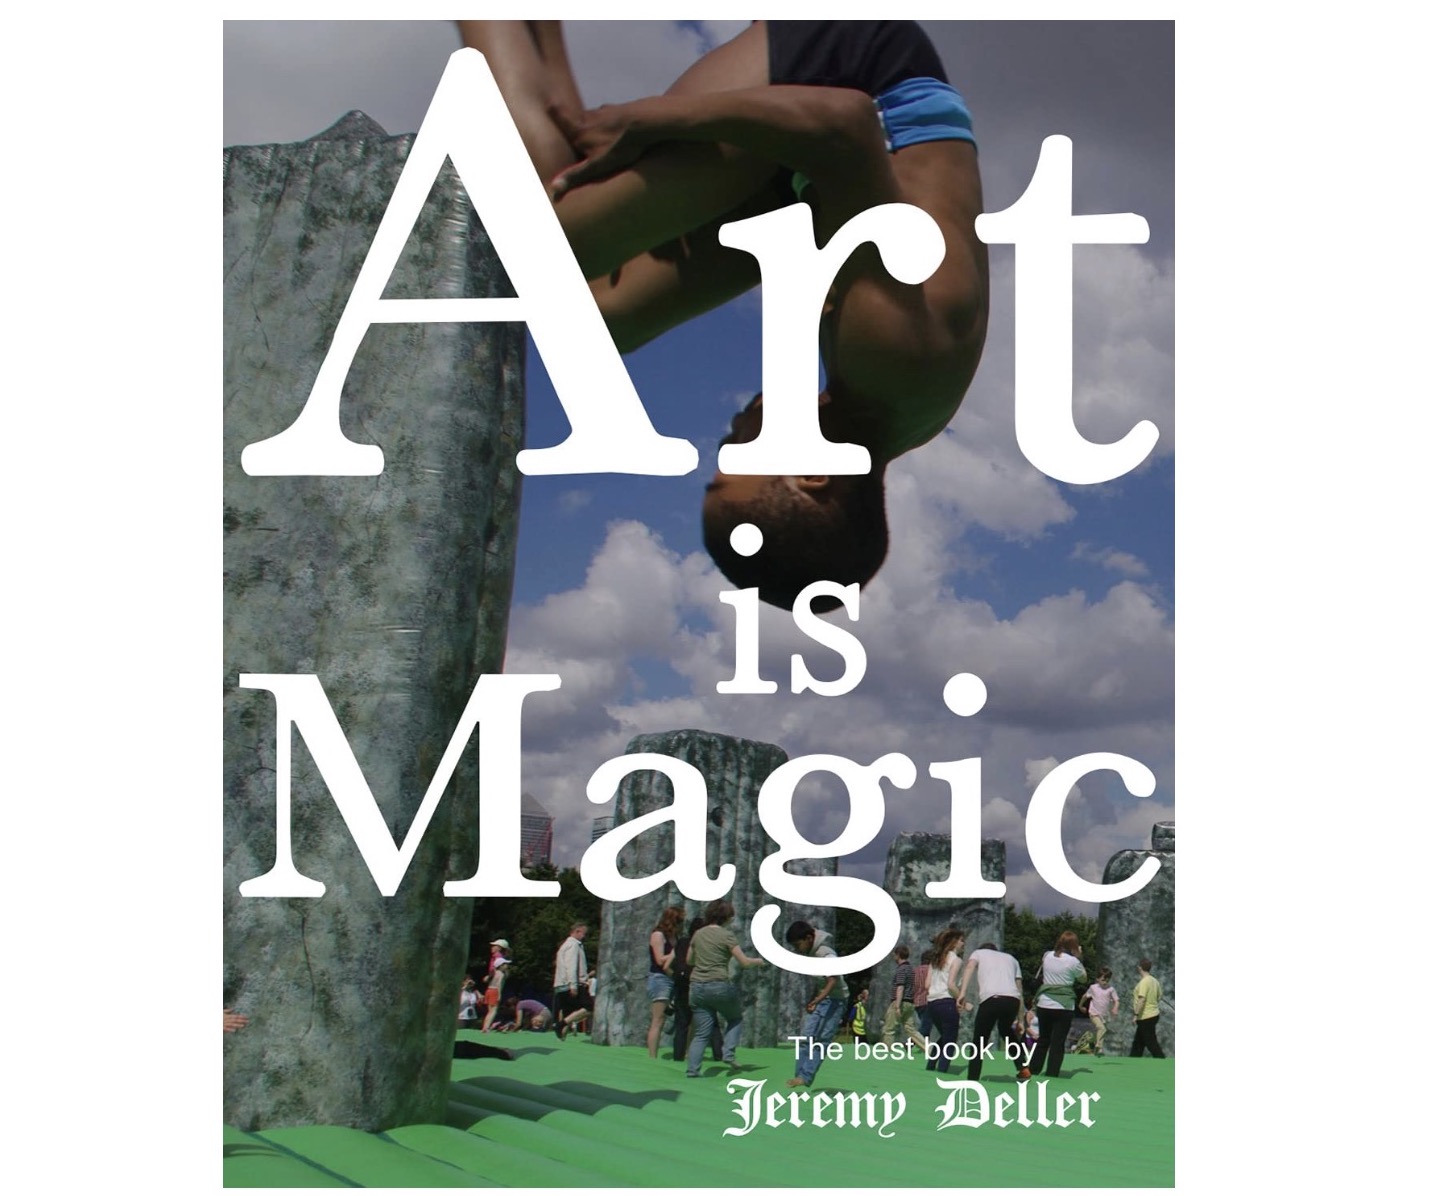 Jeremy Deller Art Is Magic – Review by Jude Montague